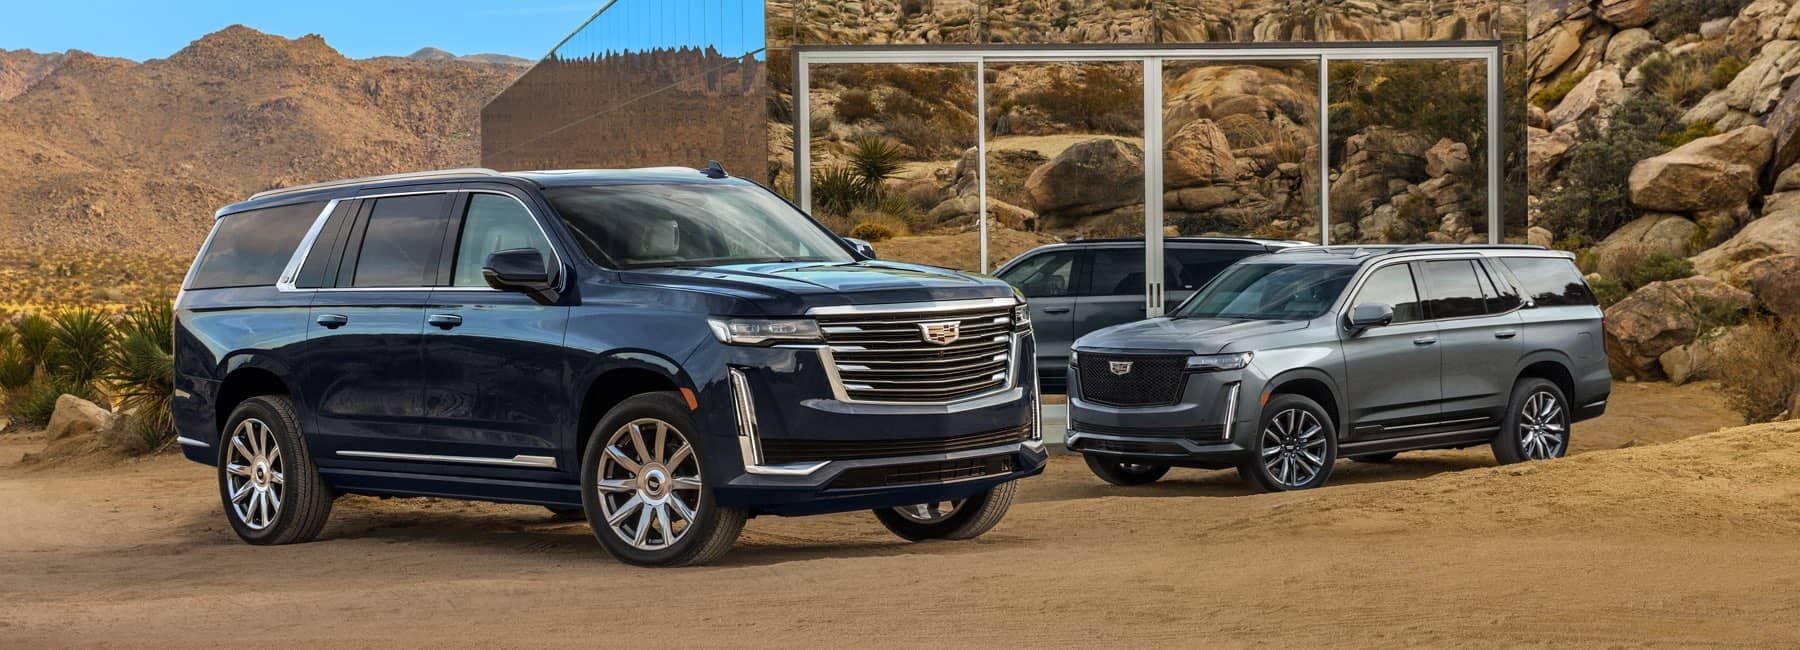 Two 2021 Cadillac Escalades parked in front of a glass house